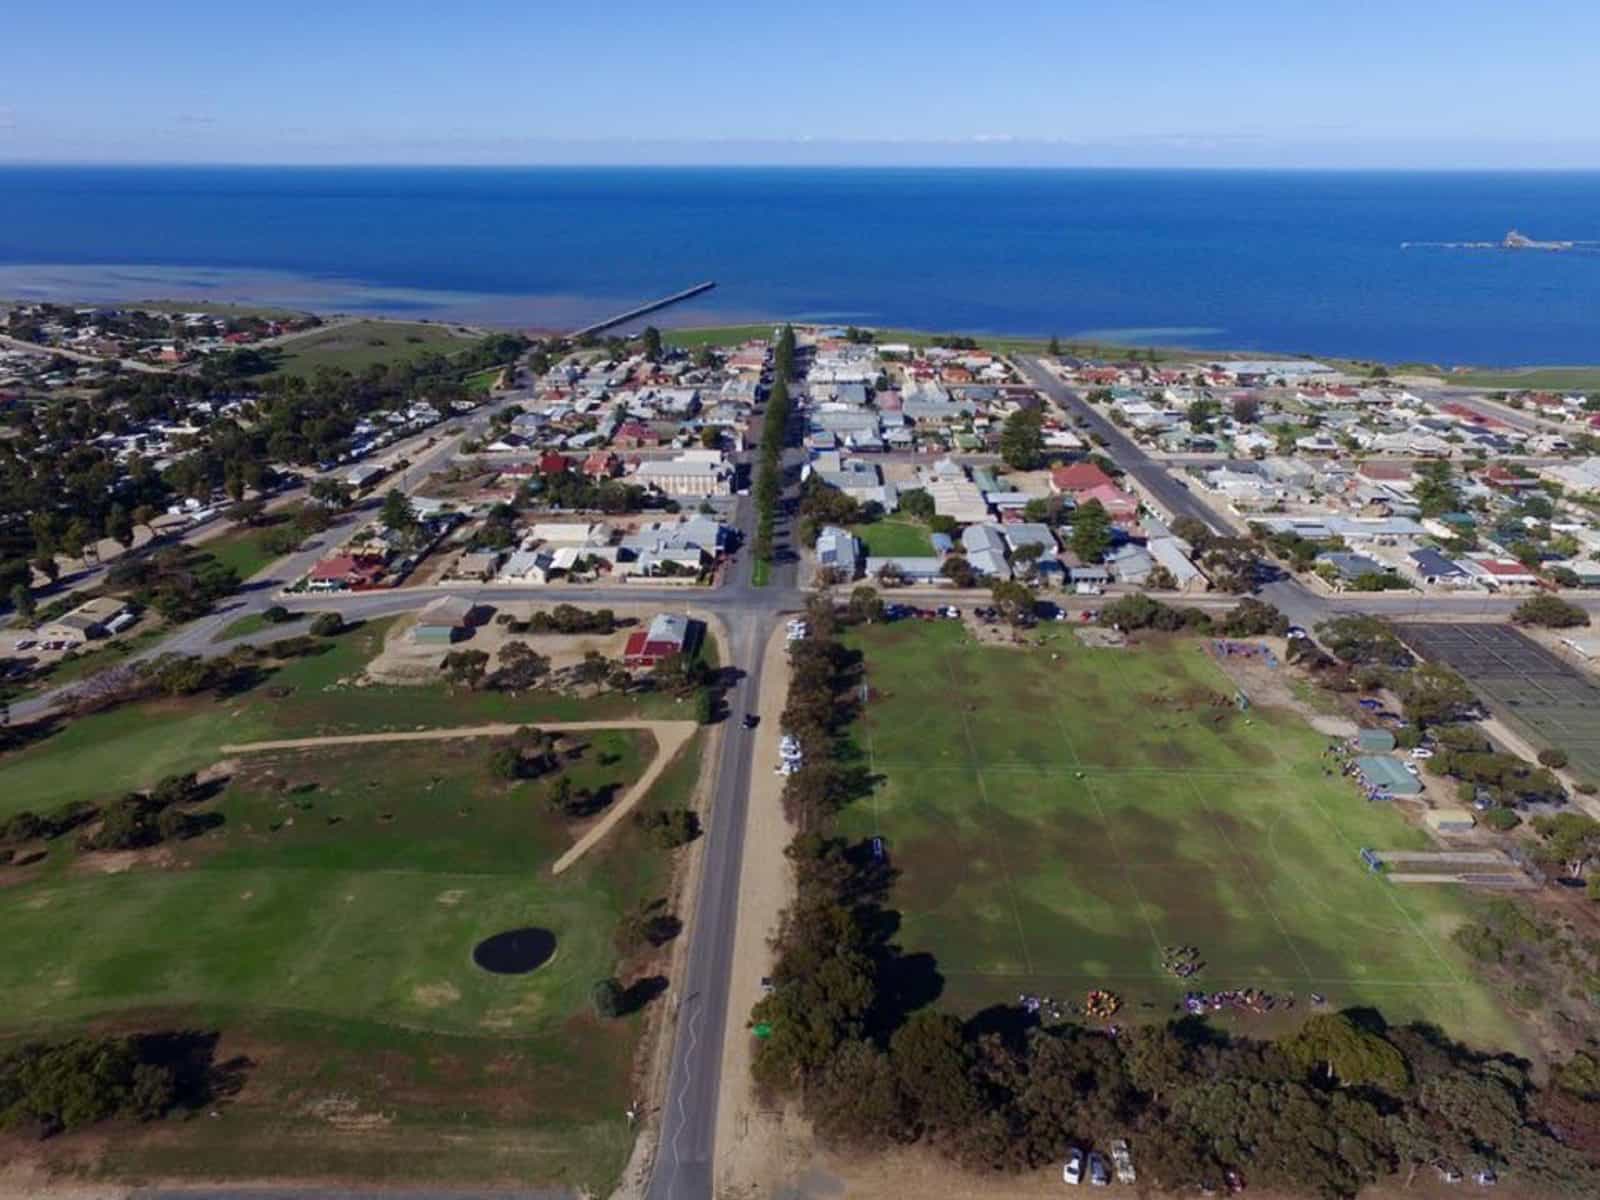 A drone view of Ardrossan